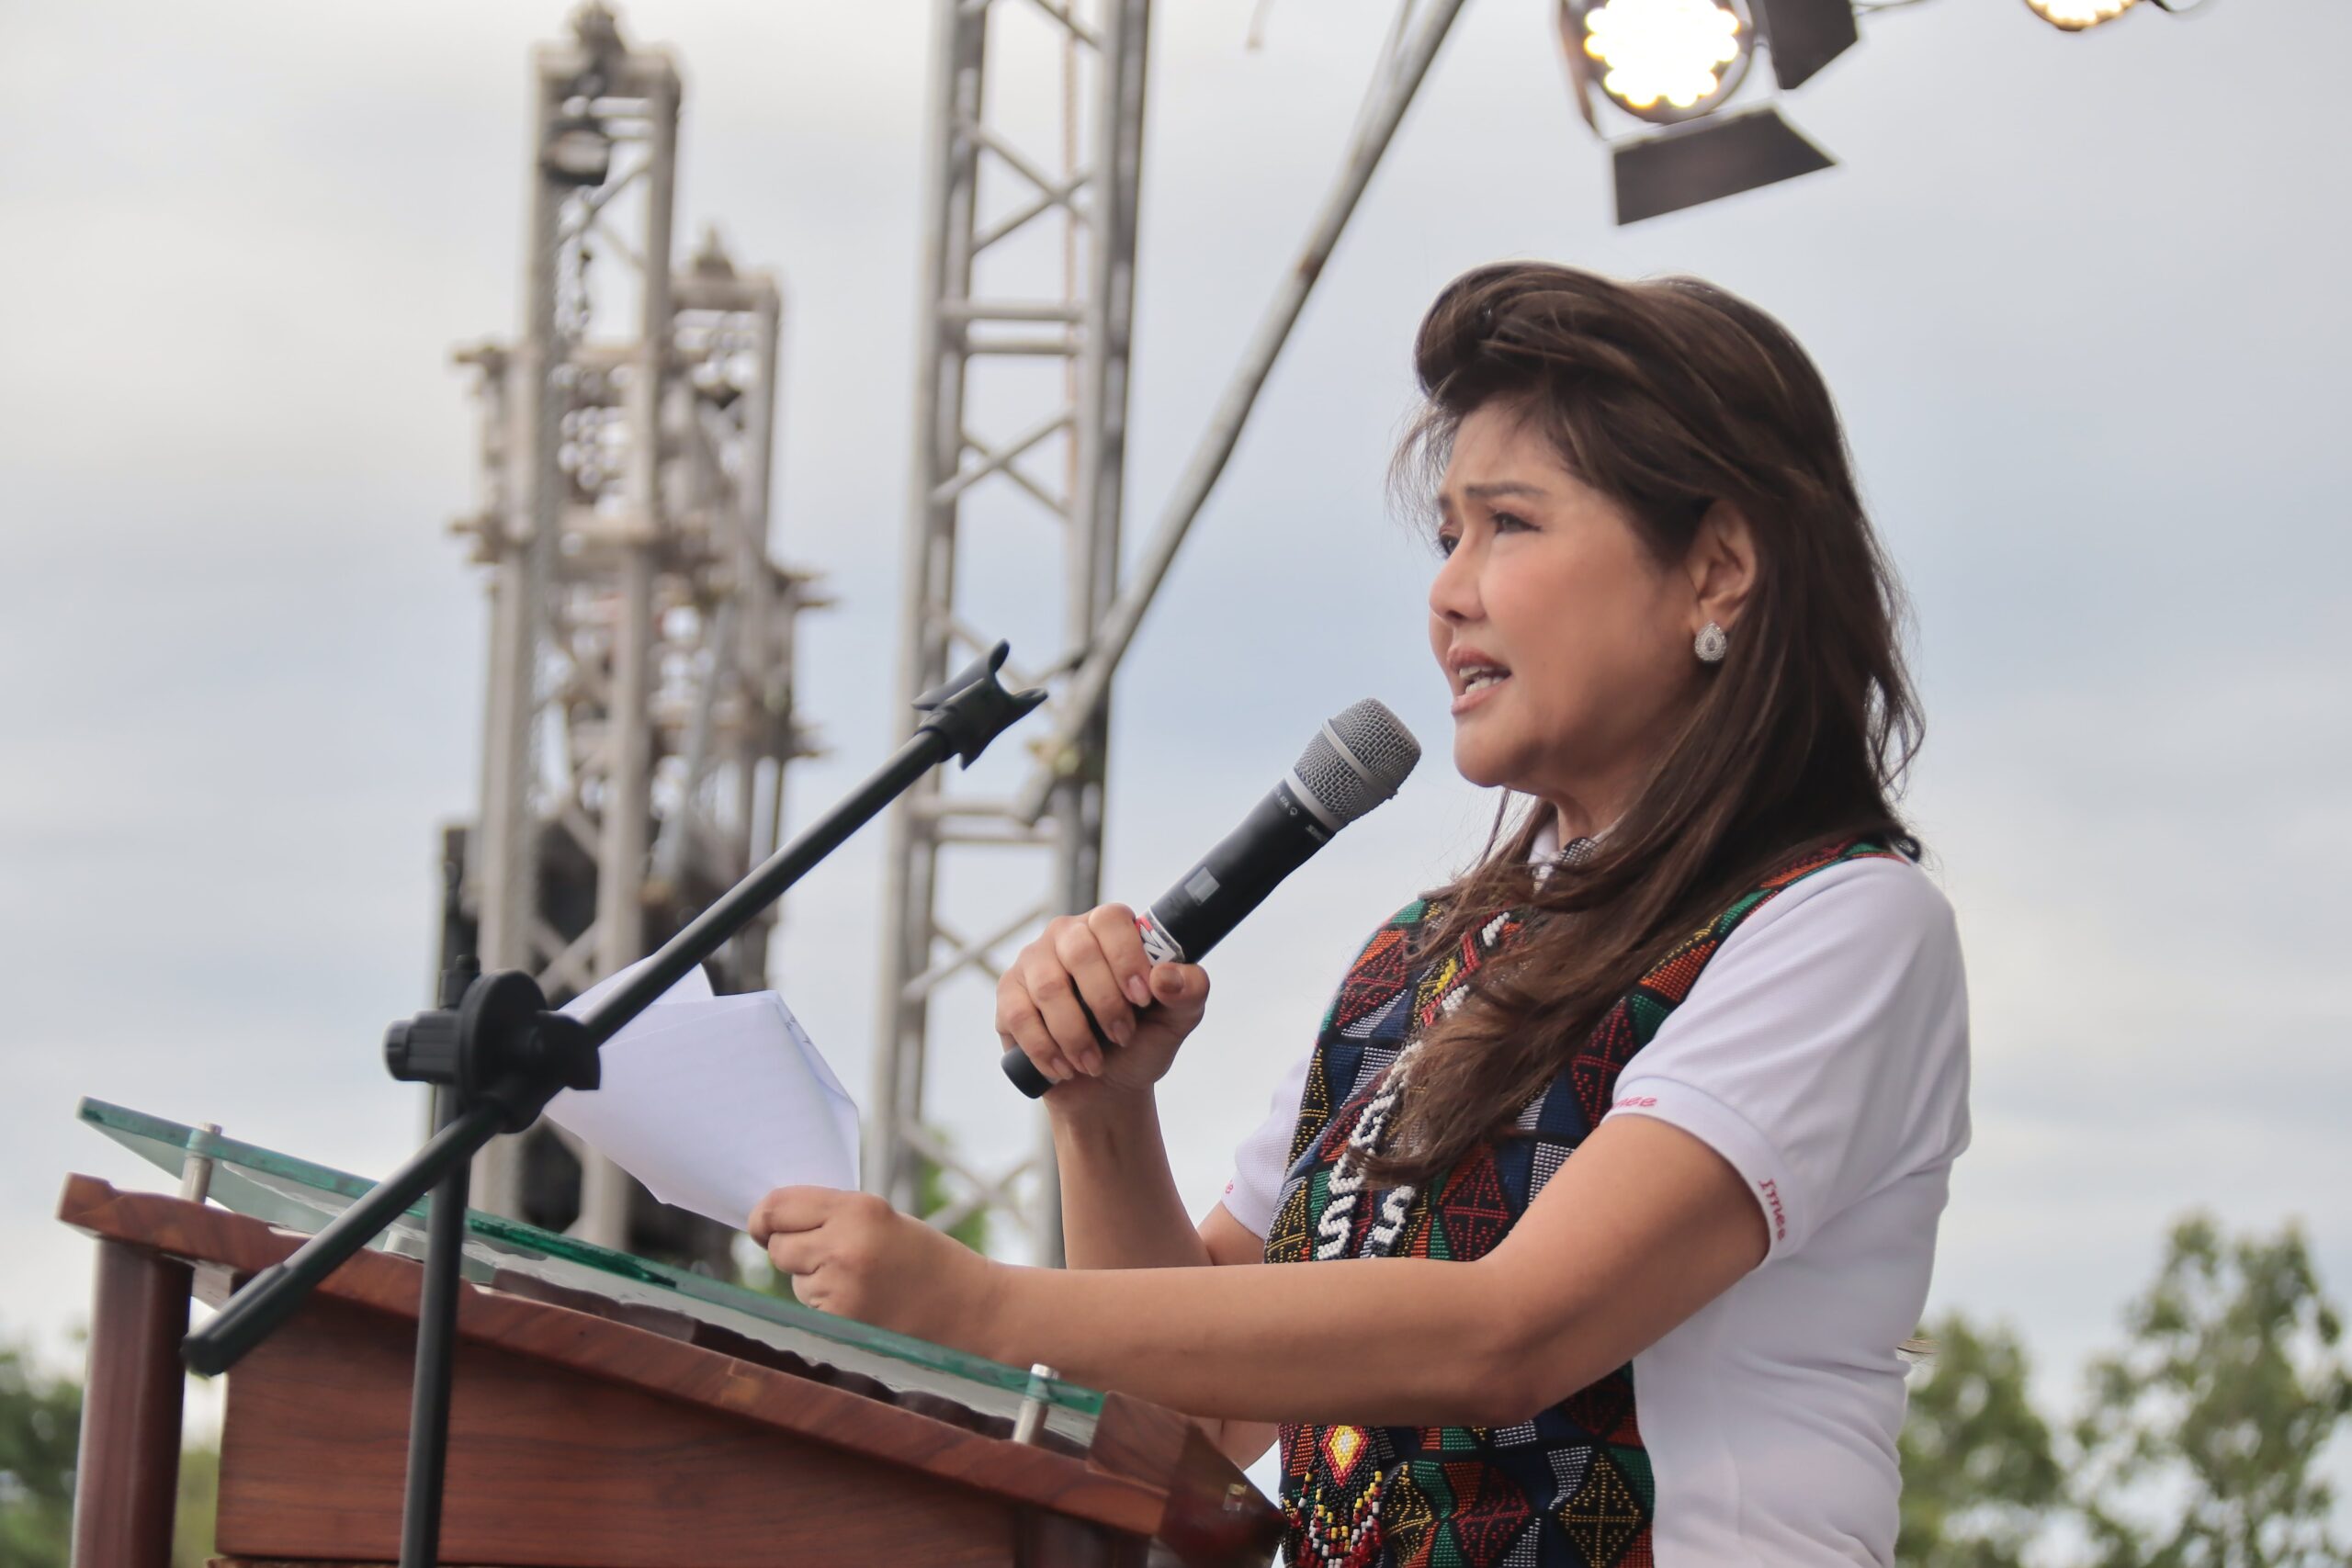 Imee Urges Revival of Late Father's Self-Reliance to Combat Chinese Aggression in the West Philippine Sea